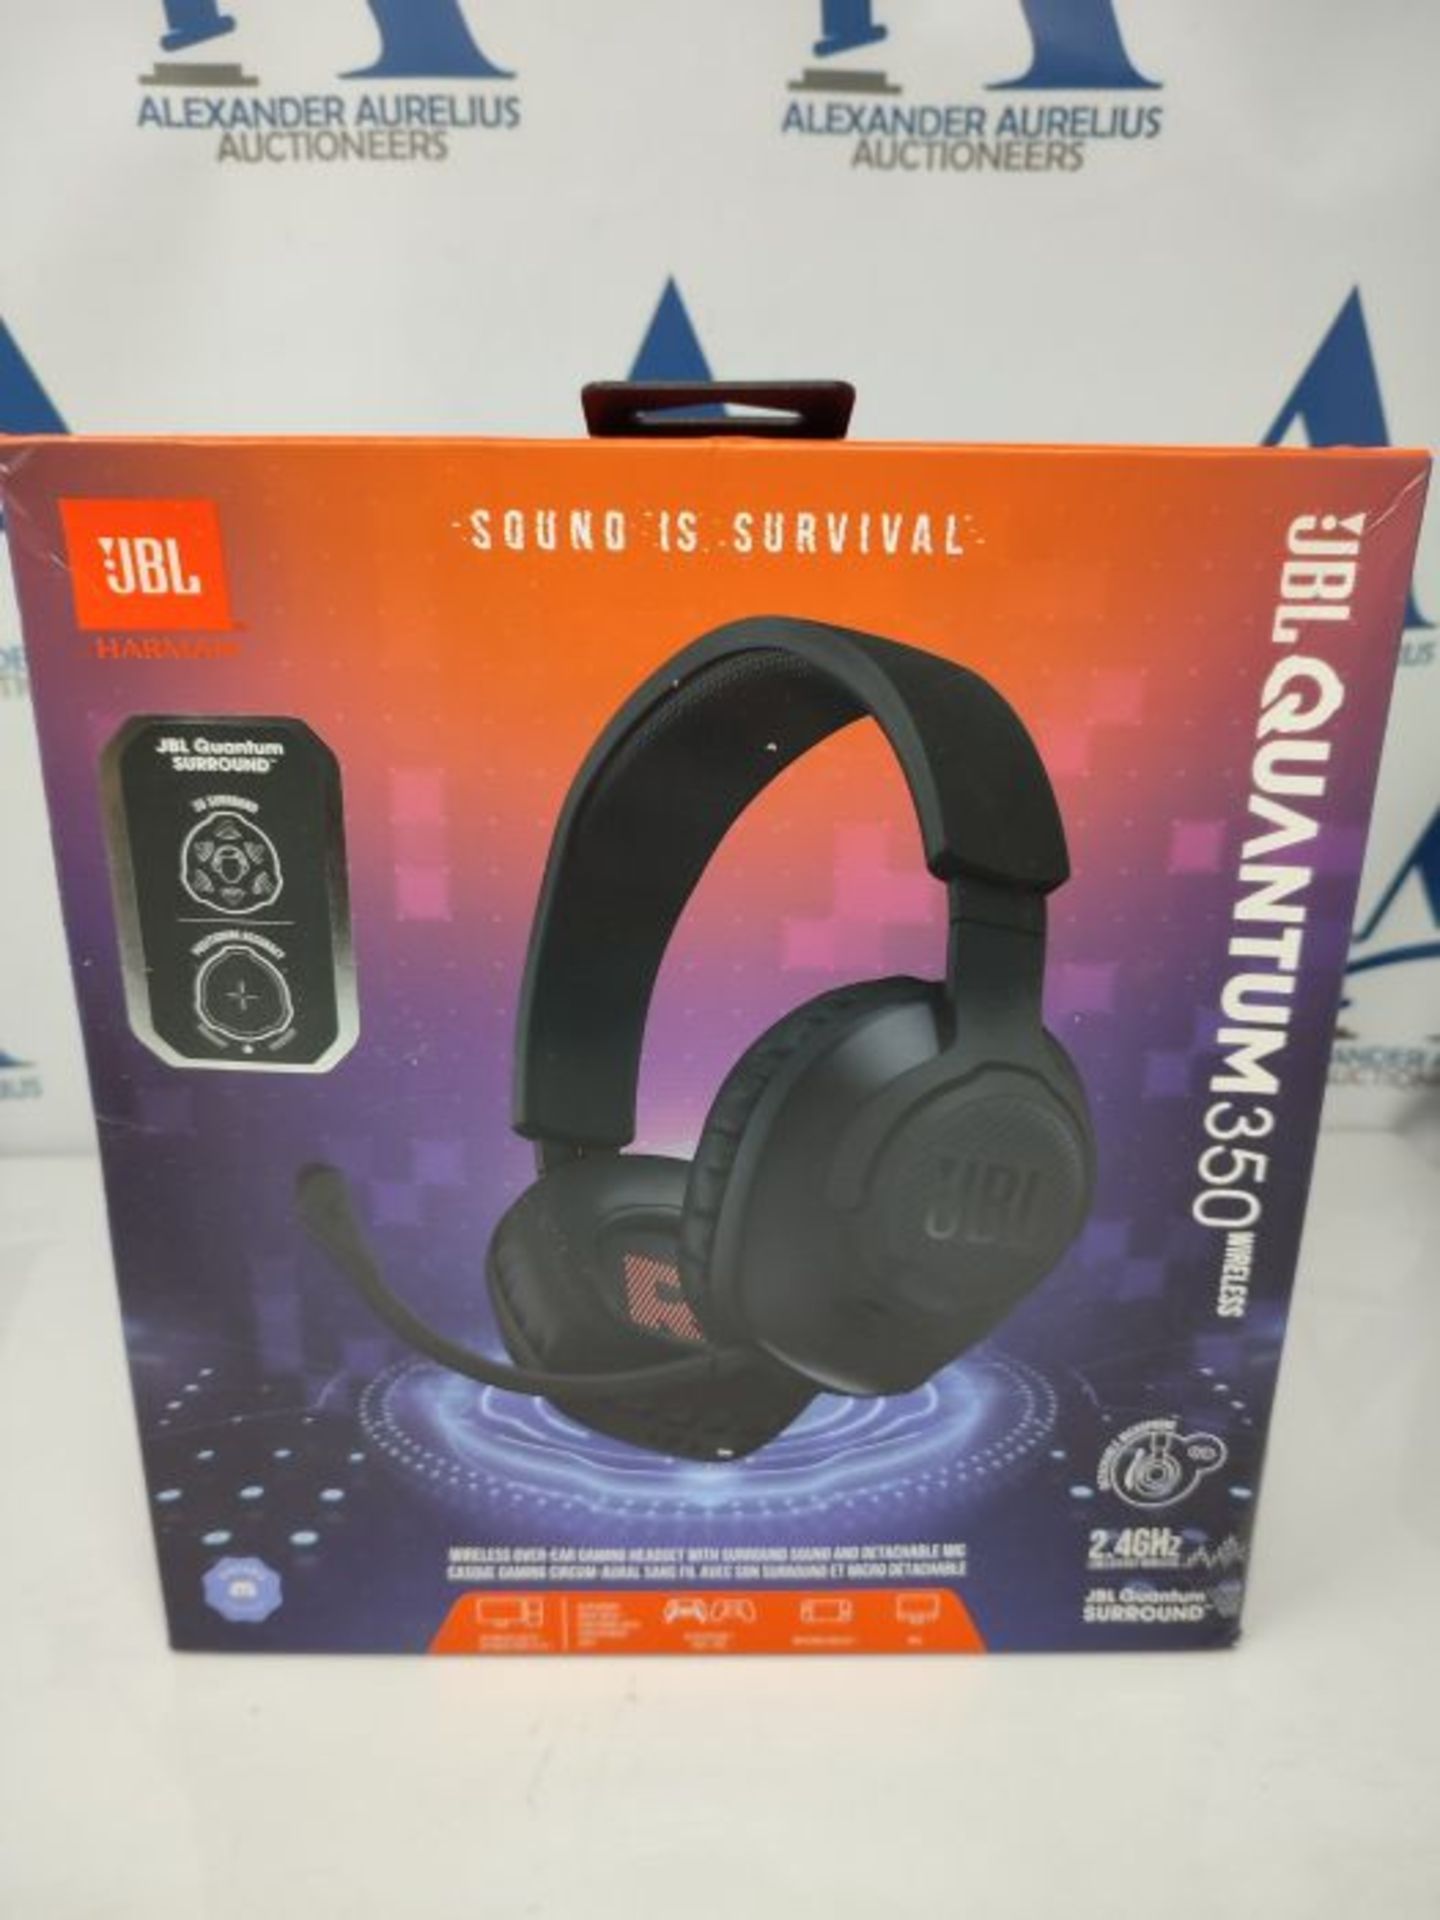 RRP £69.00 JBL QUANTUM 350 WIRELESS Gaming Headset with Boom Mic, Adjustable Headband and USB Con - Image 2 of 3